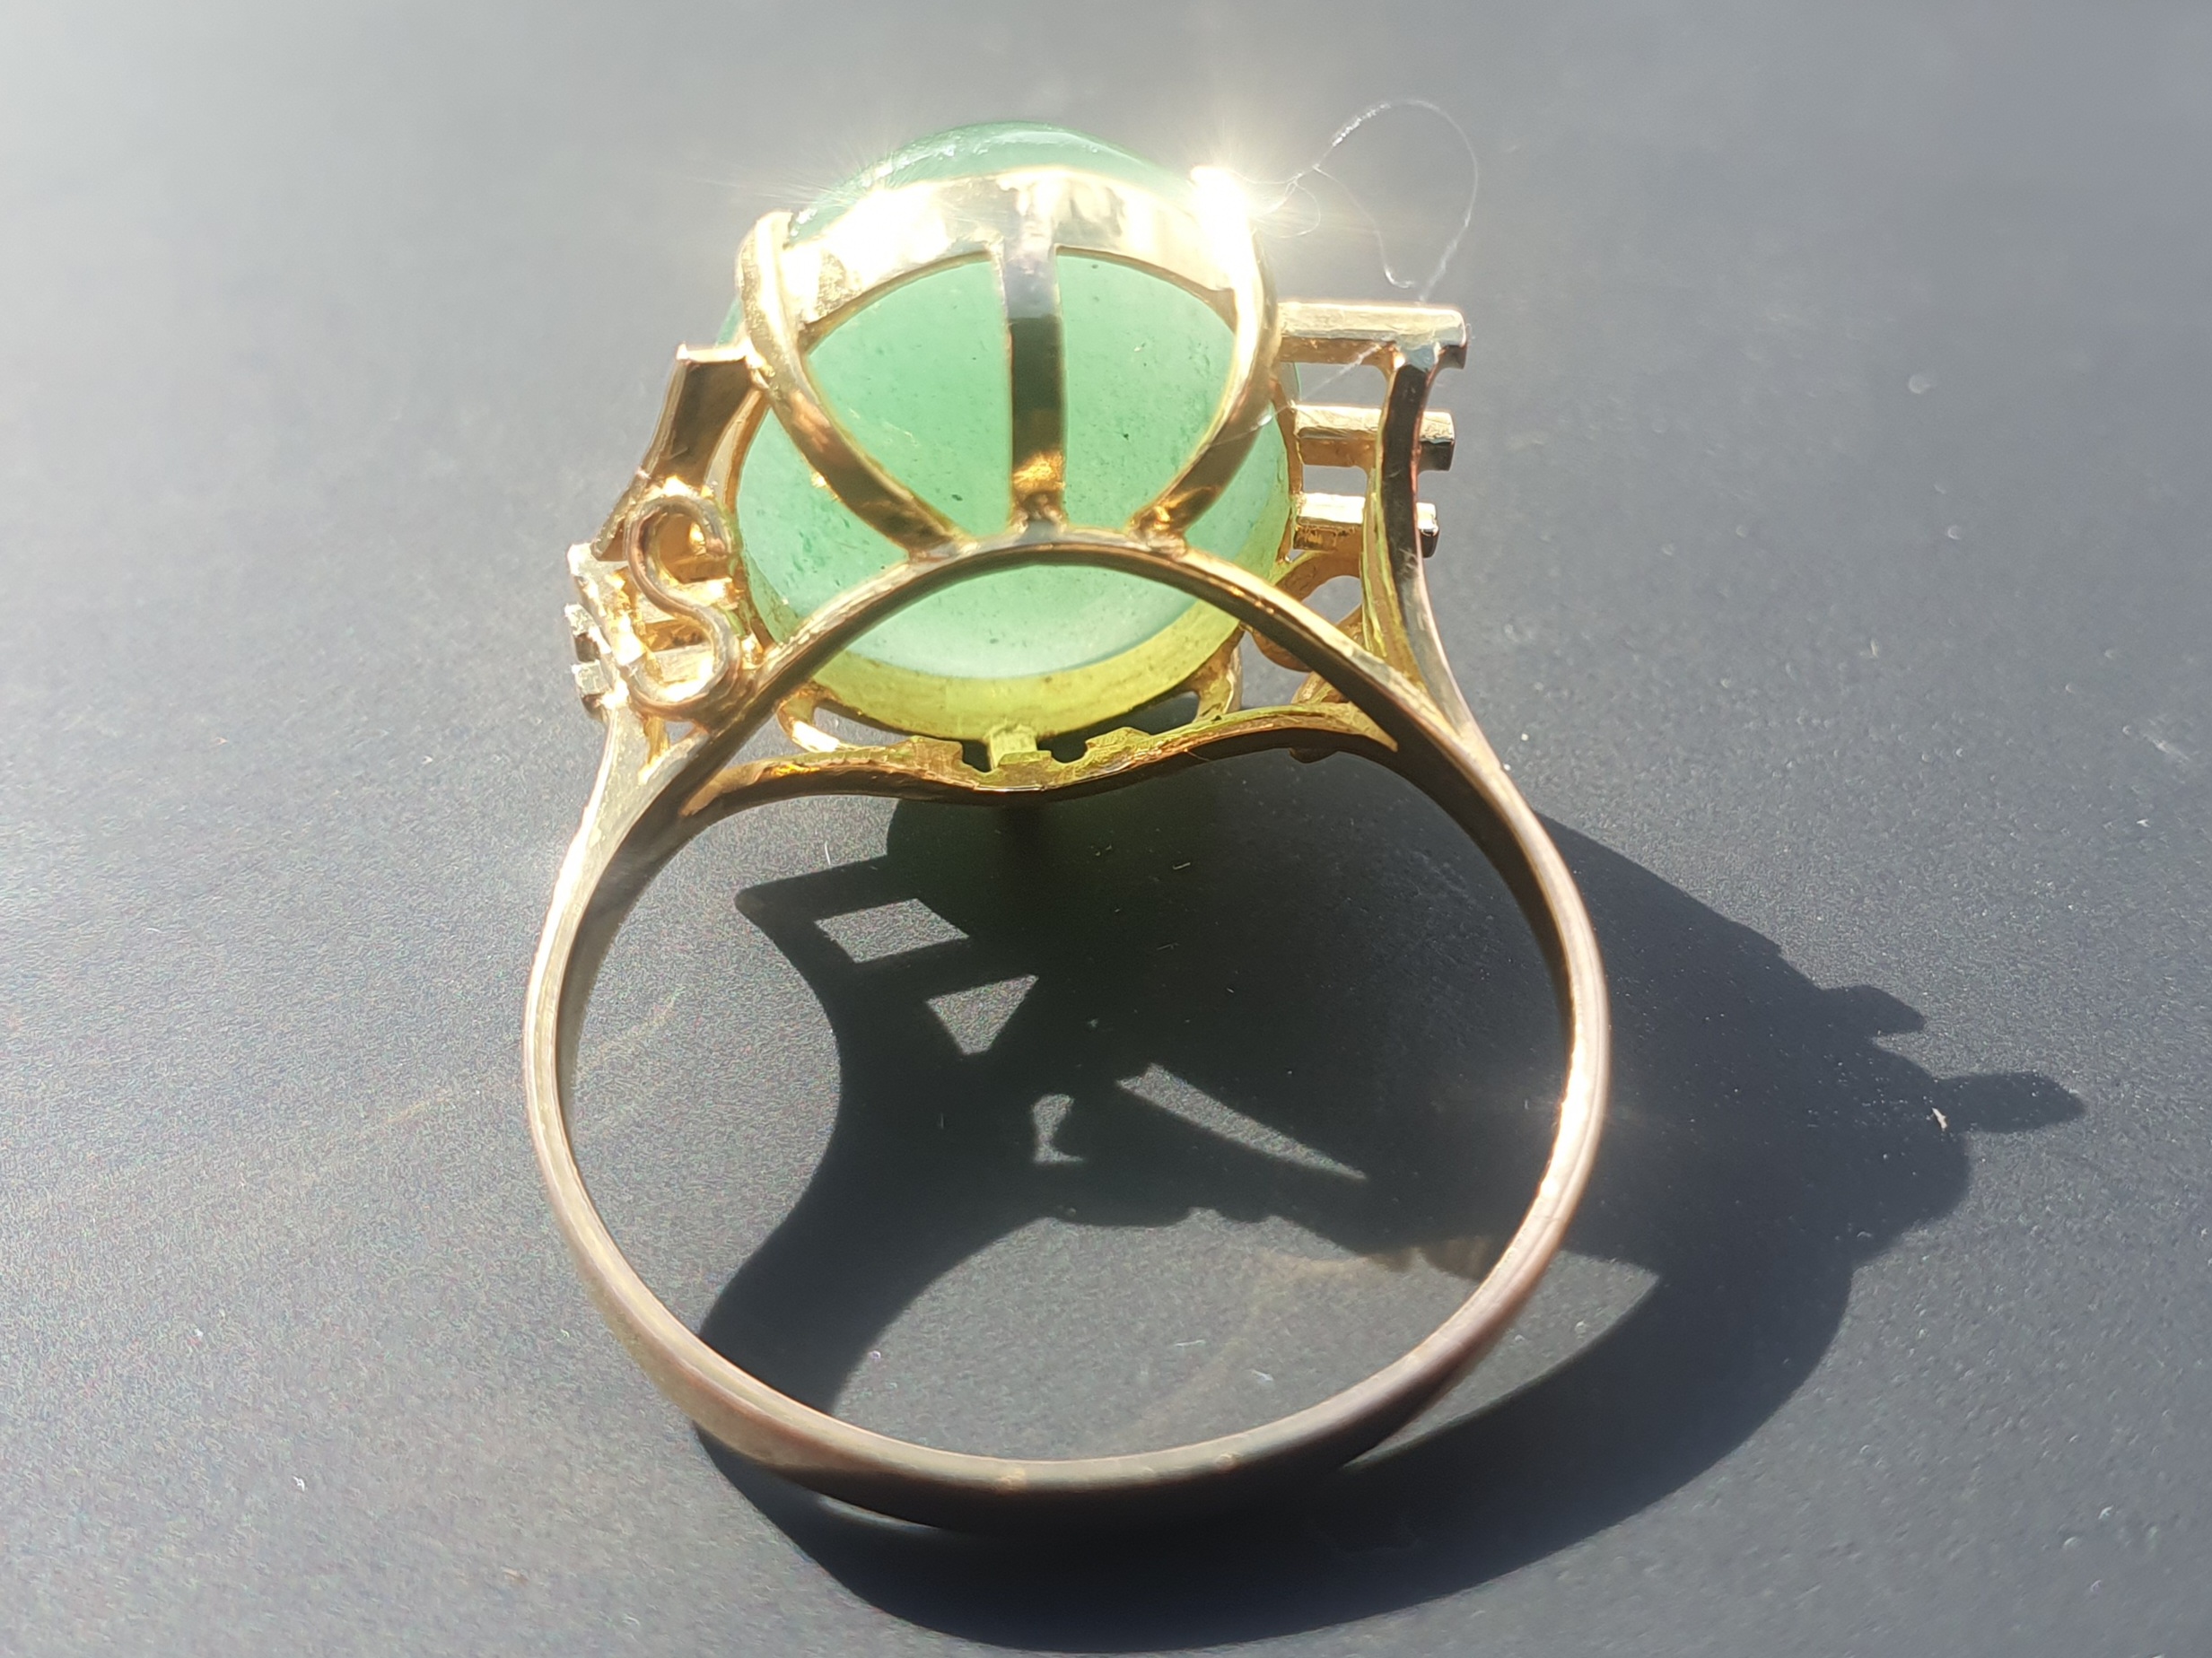 14ct Gold Jade Ring. Gross weight 3.79g, size L - Image 3 of 3